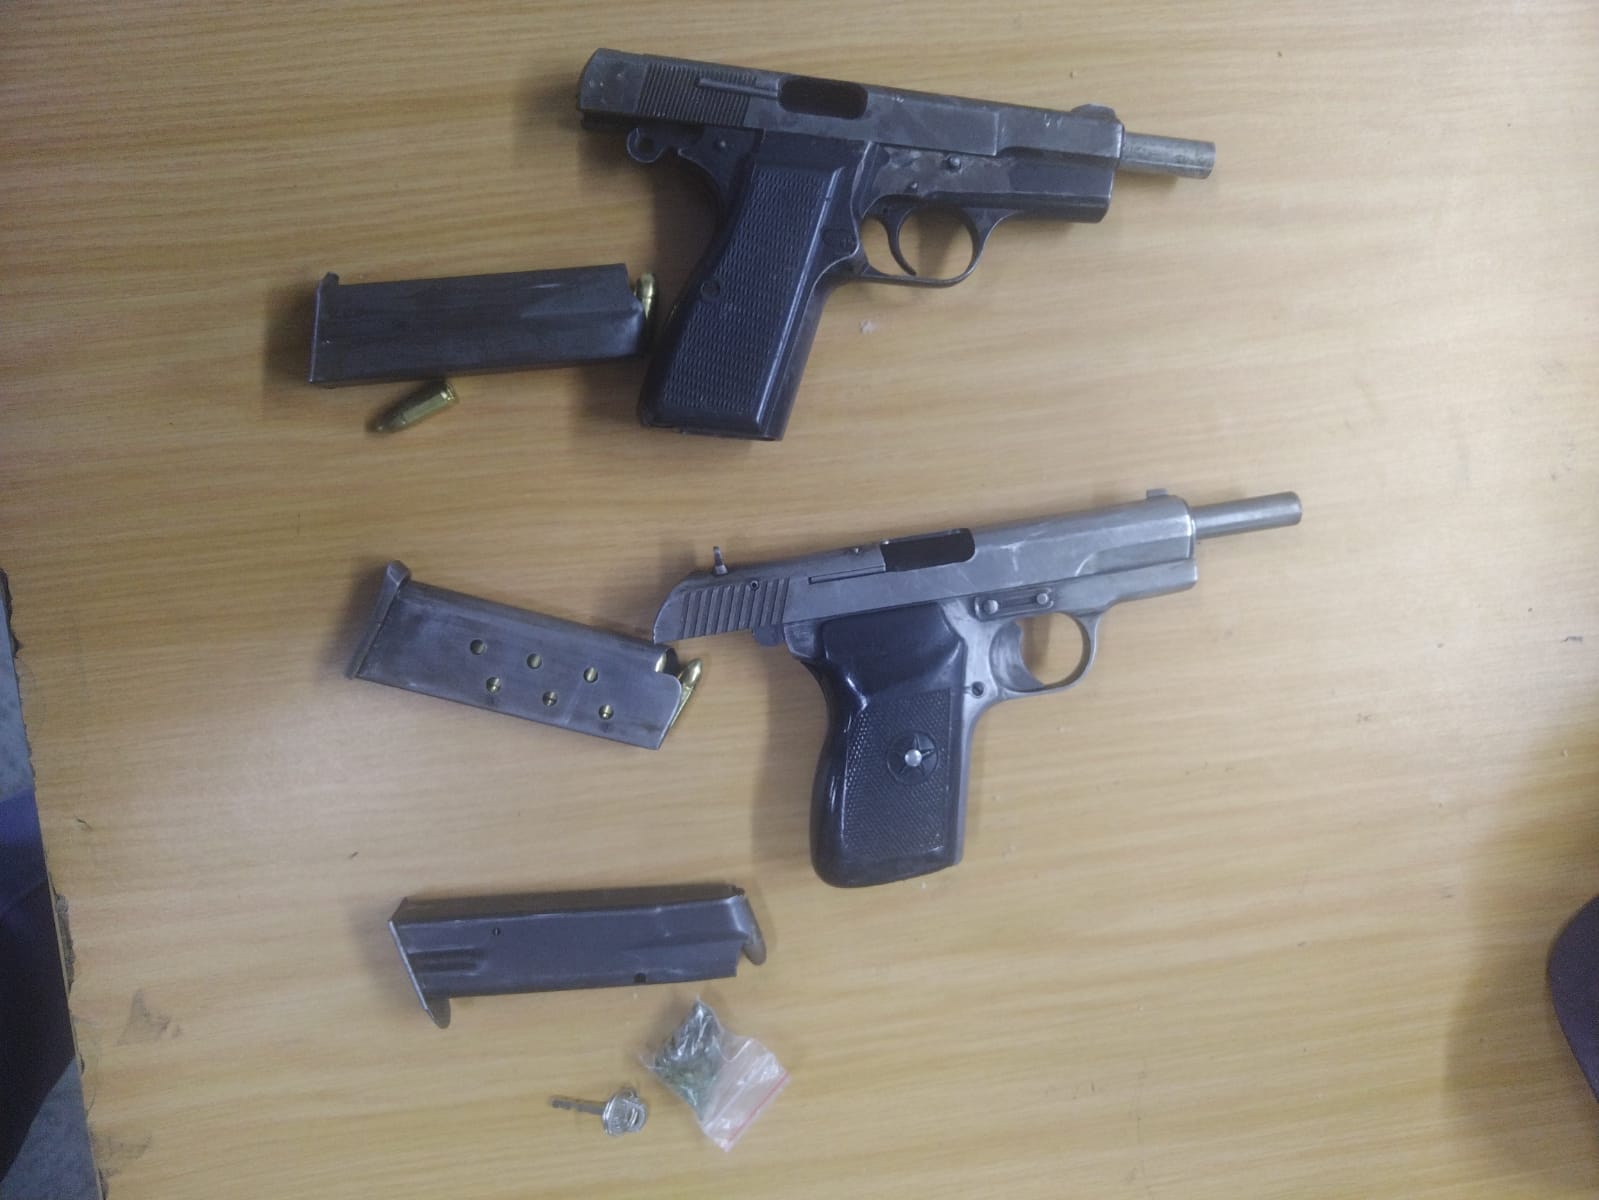 SAPS disarm suspects in the Western Cape